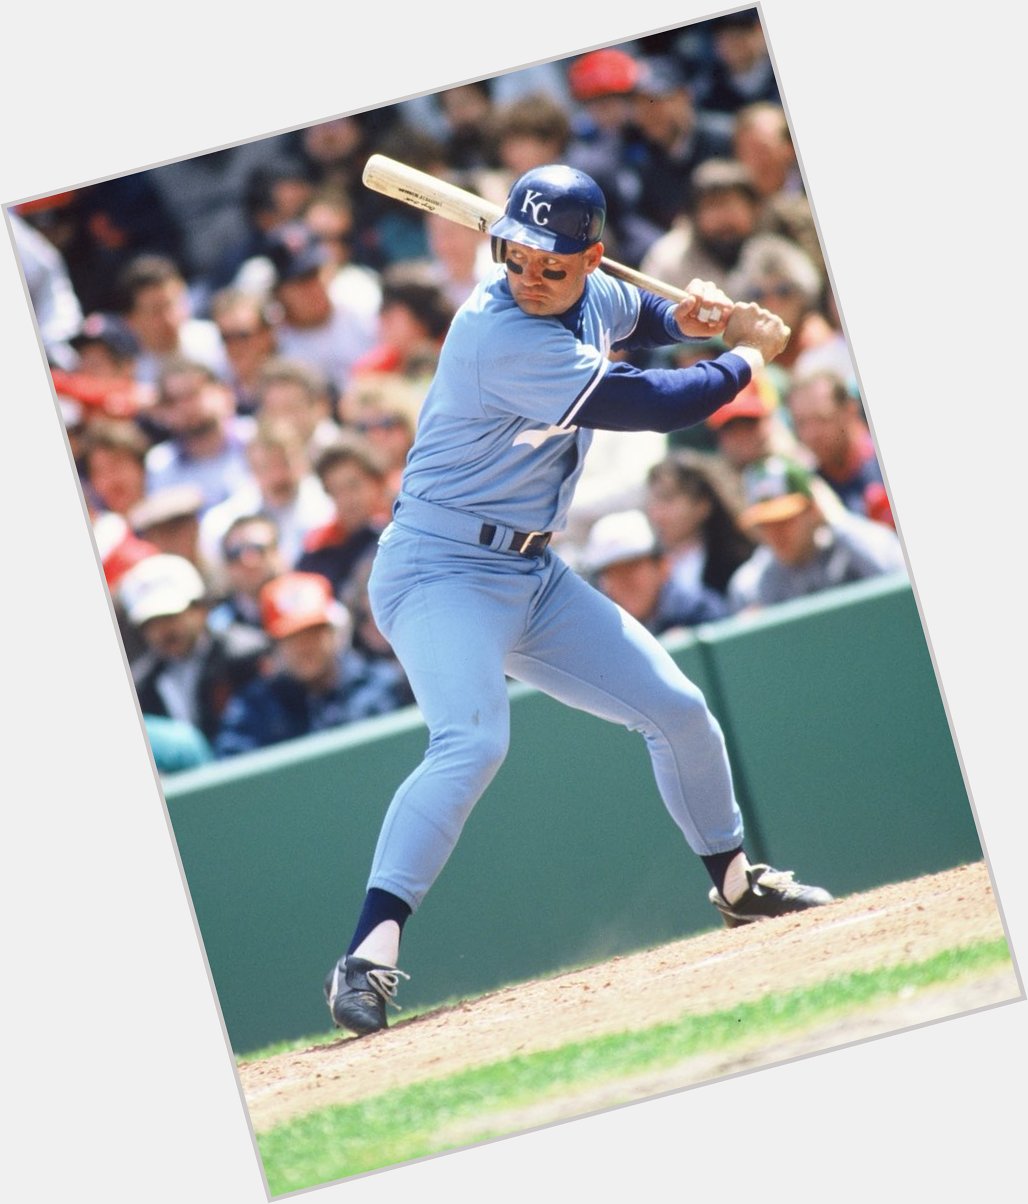 Happy birthday to the greatest third baseman of all time in my eyes and the man I was named after, George Brett!! 